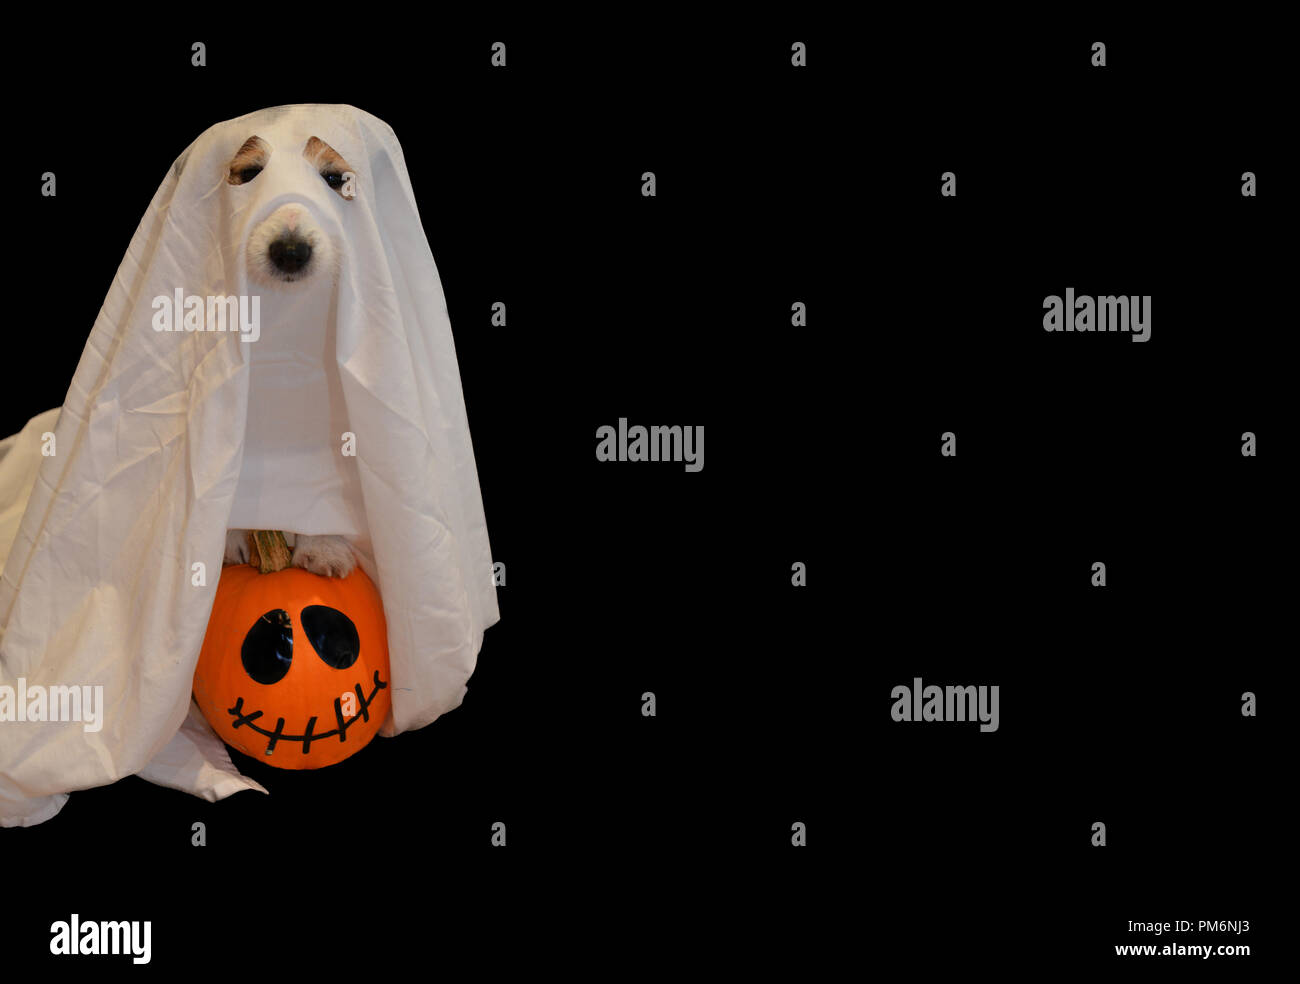 DOG IN A GHOST HALLOWEEN COSTUME UPLOADED IN A PUMPKIN AGAINST BLACK BACKGROUND Stock Photo